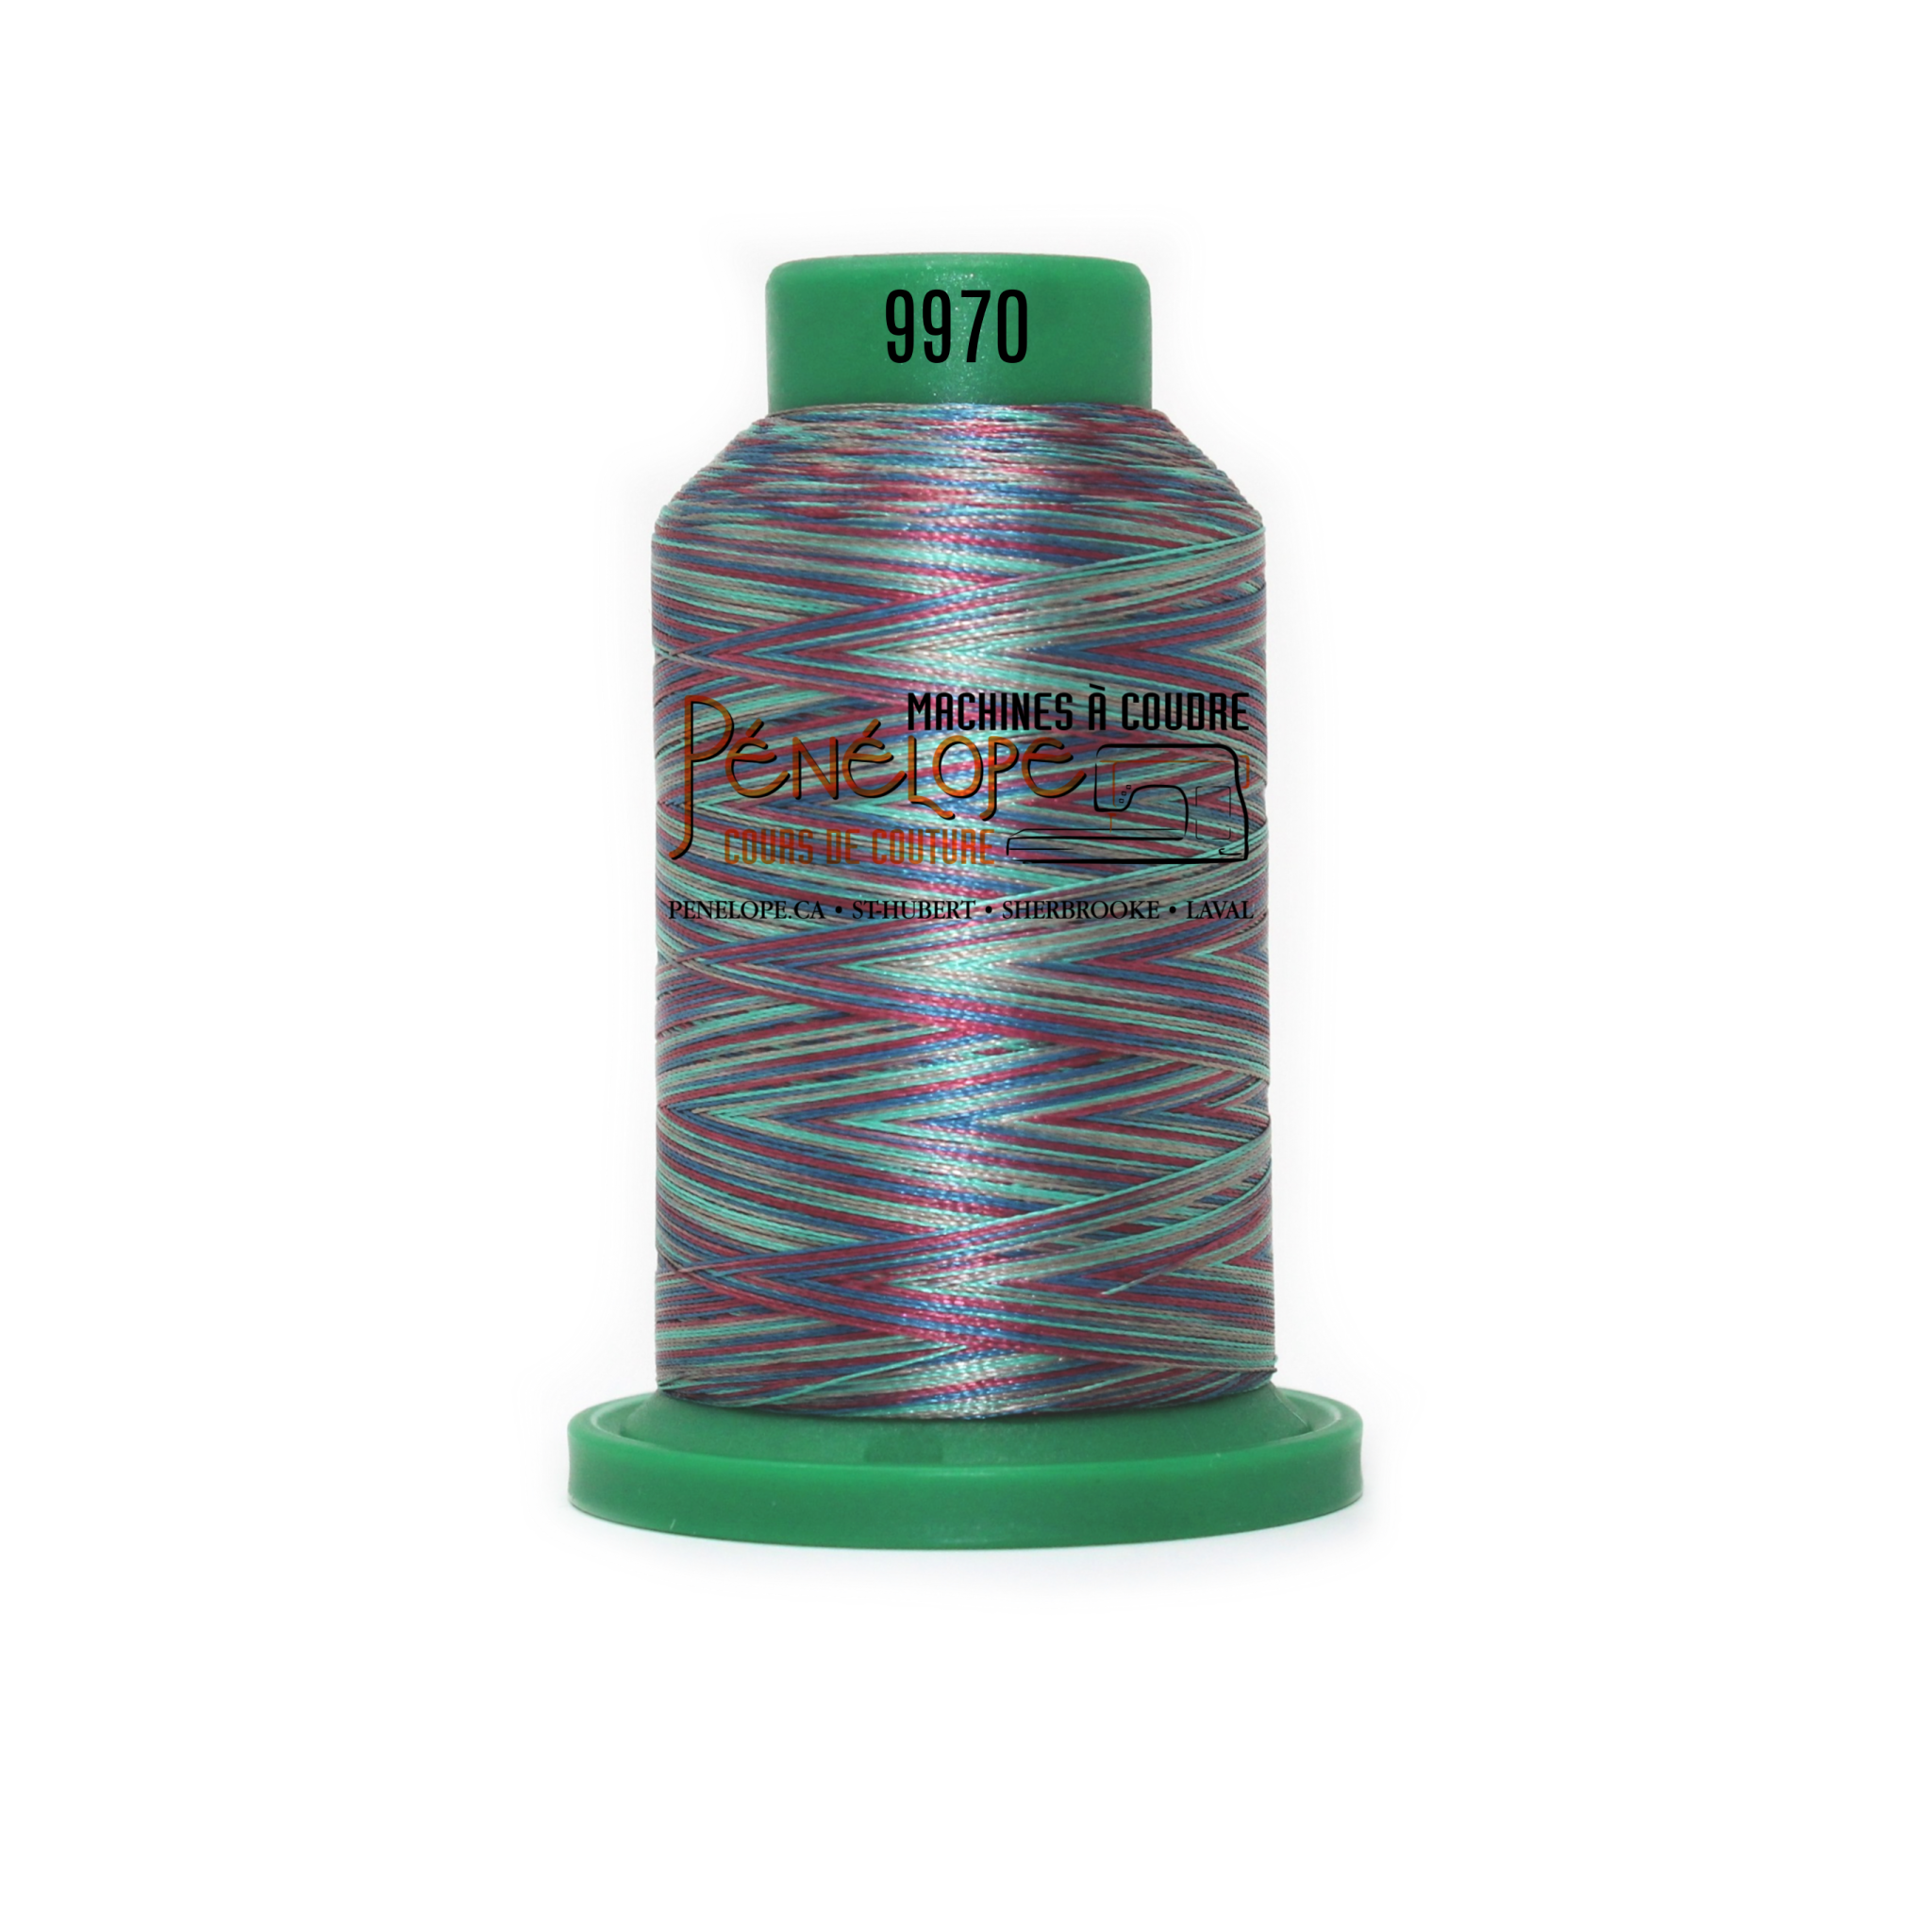 Isacord Isacord multicolor thread 9970 1000 m for embroidery and sewing